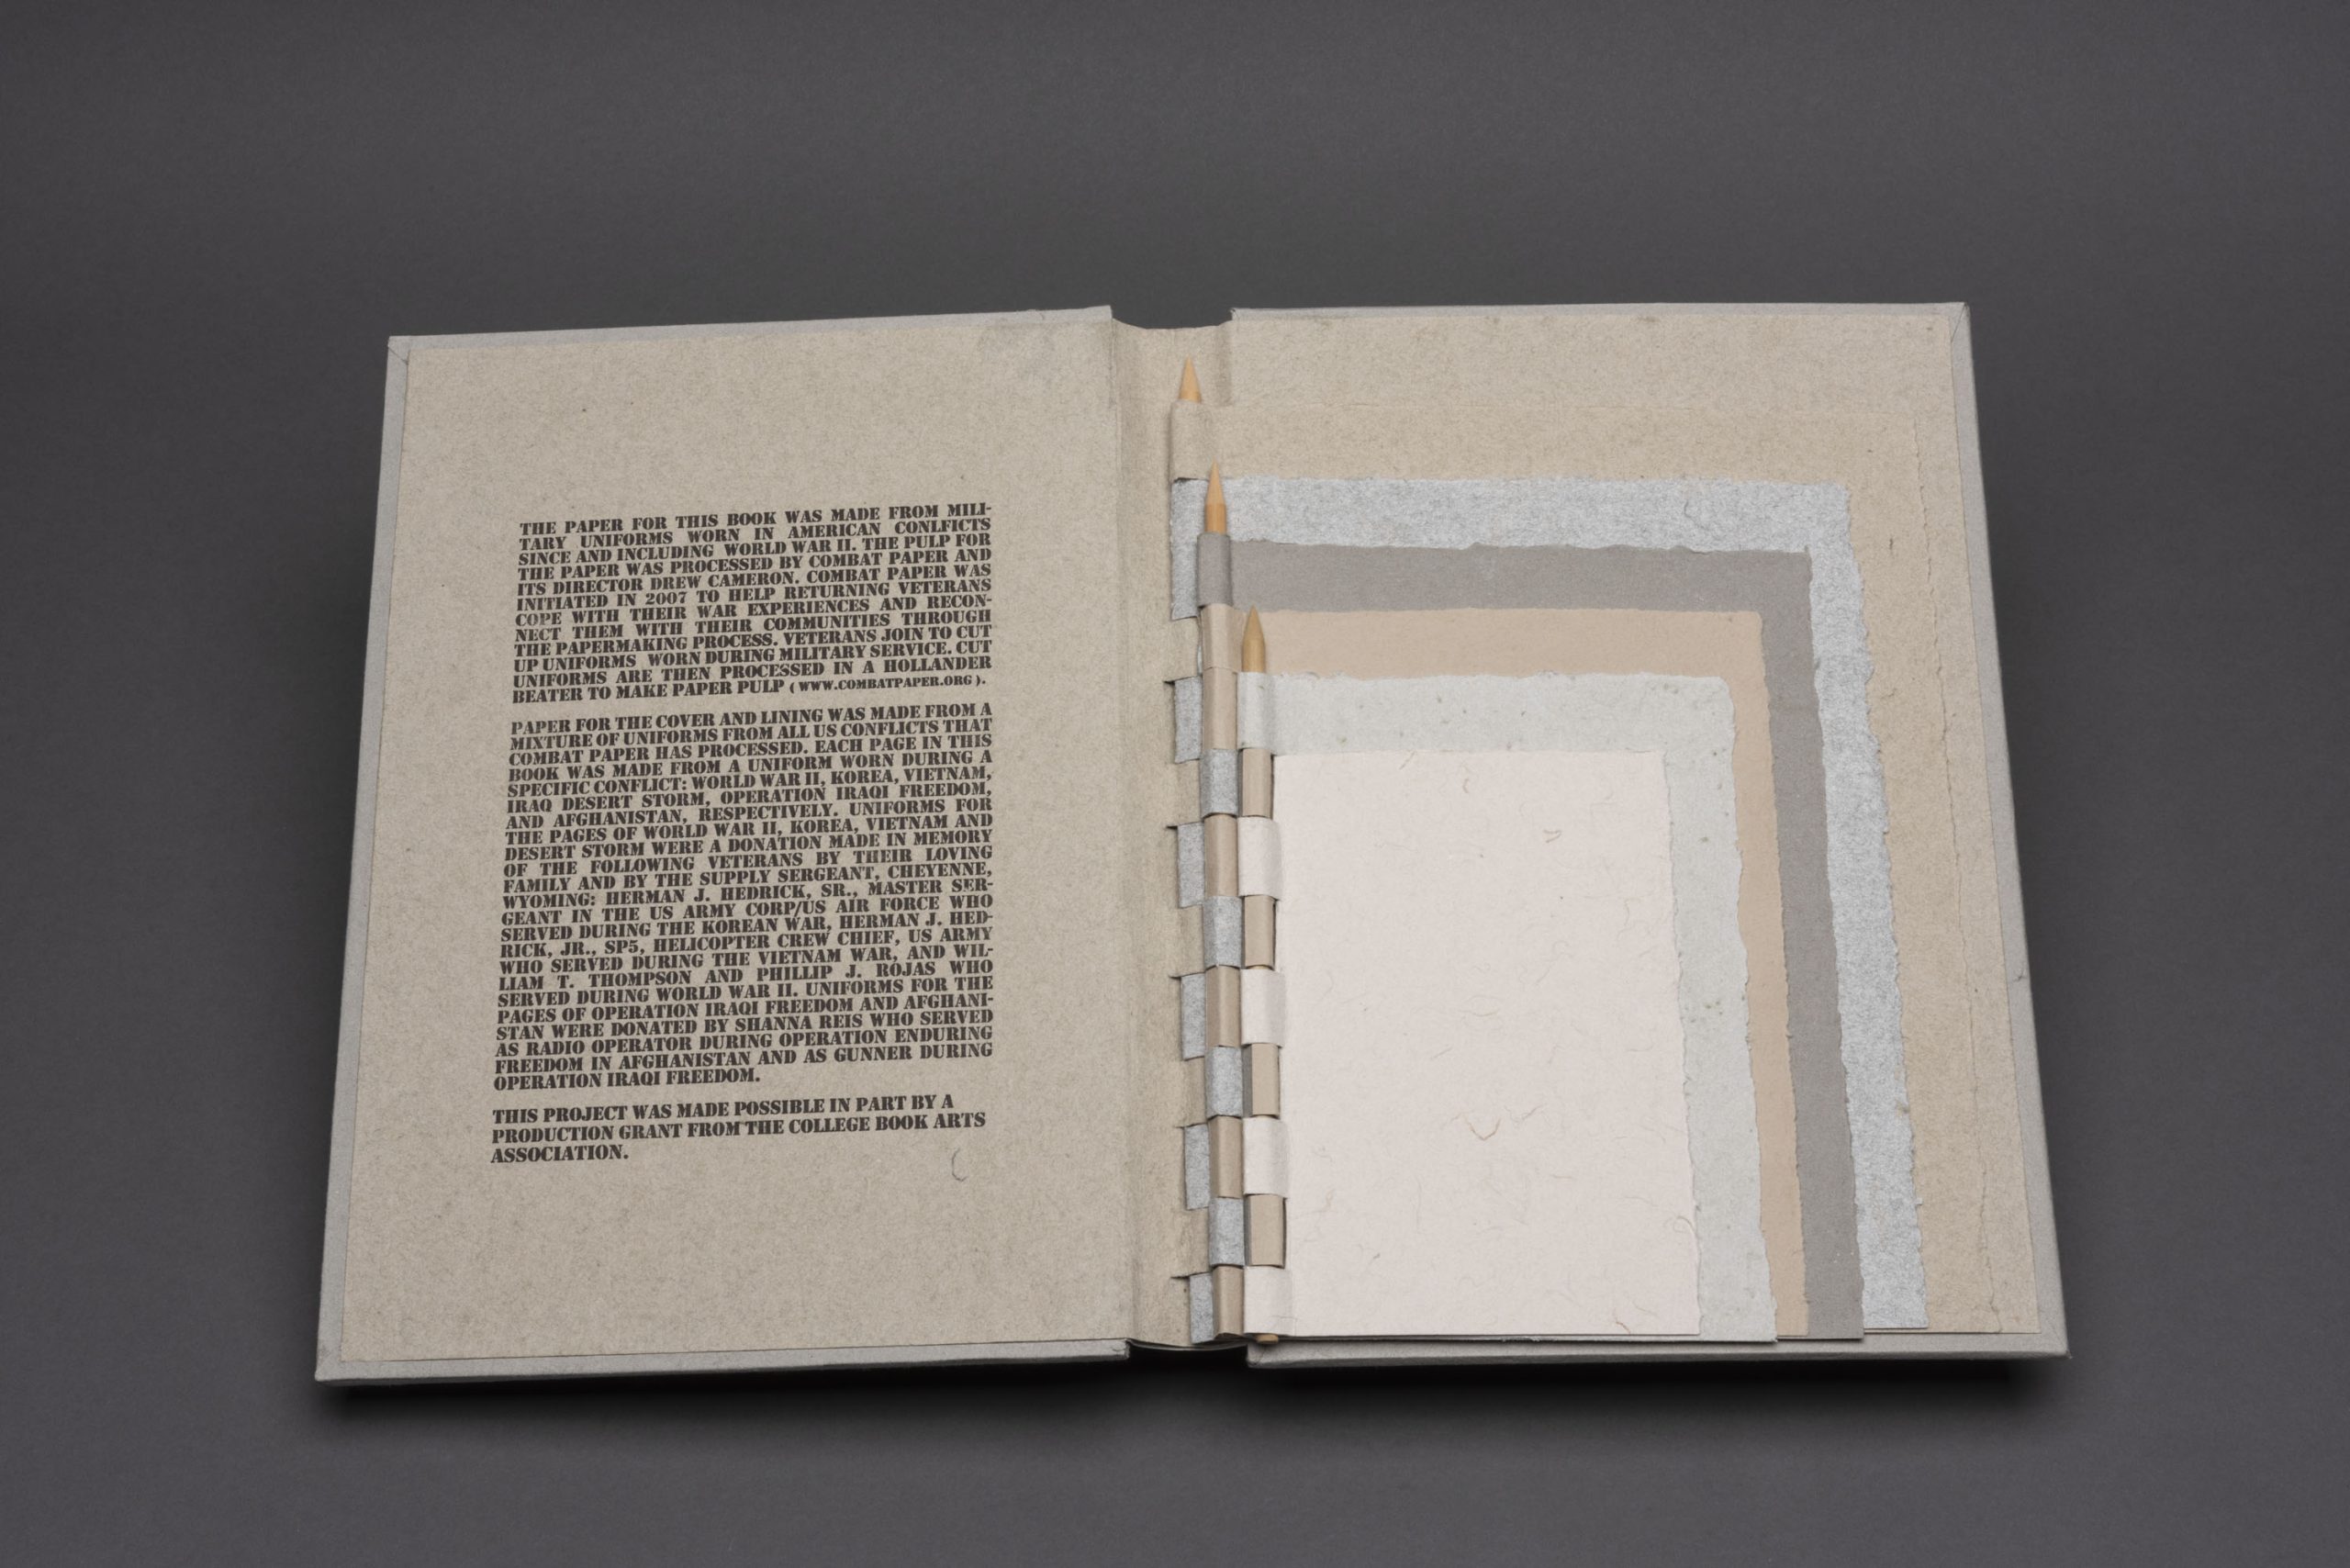 An artist's book with pages of handcrafted paper that were made by veterans from their military uniforms.